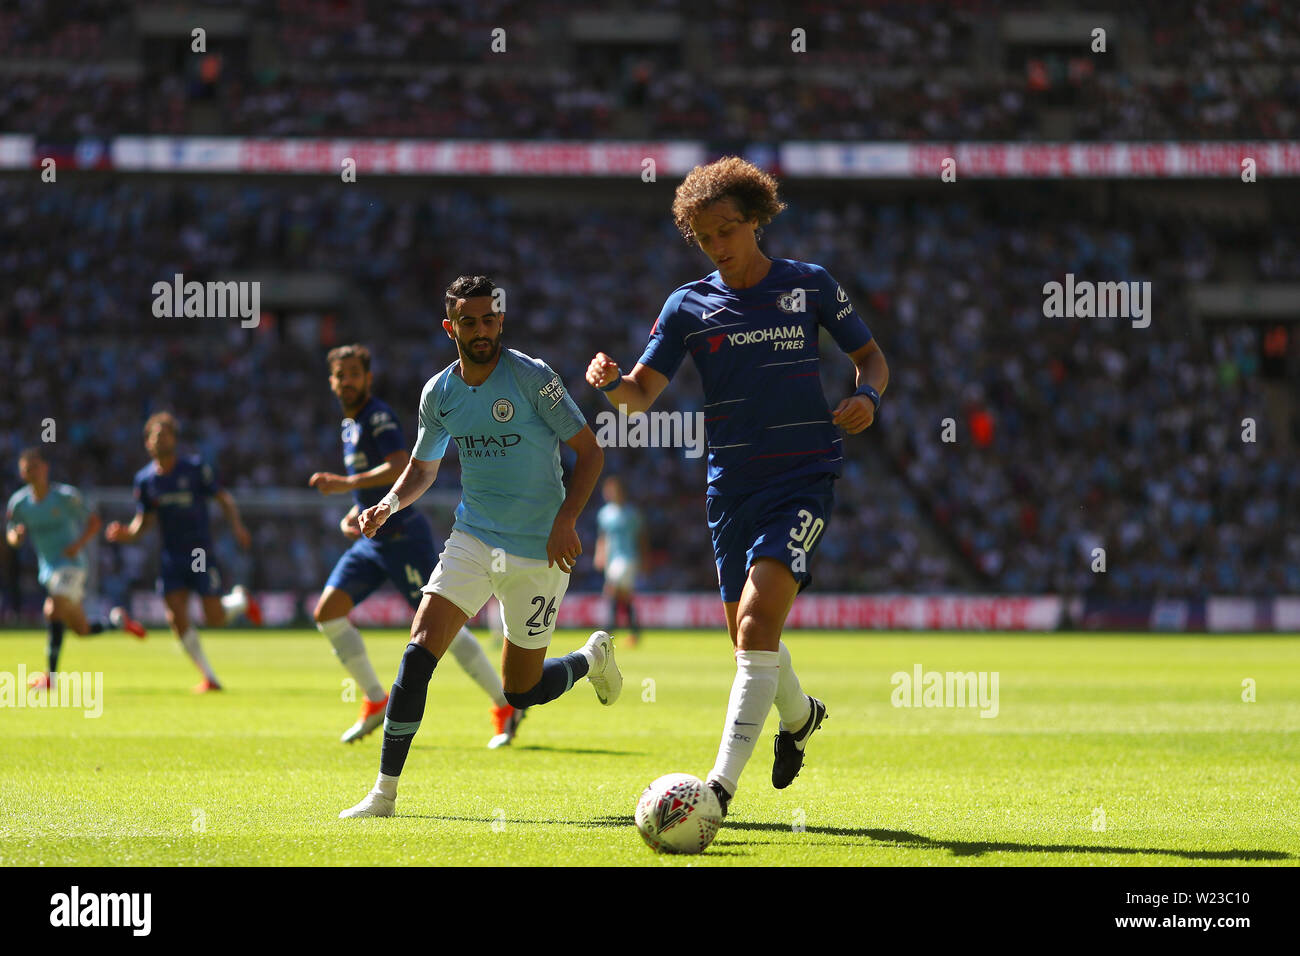 David Luiz of Chelsea comes away with the ball with Riyad Mahrez of Manchester City in pursuit - Chelsea v Manchester City, FA Community Shield, Wembley Stadium, London (Wembley) - 5th August 2018 Stock Photo